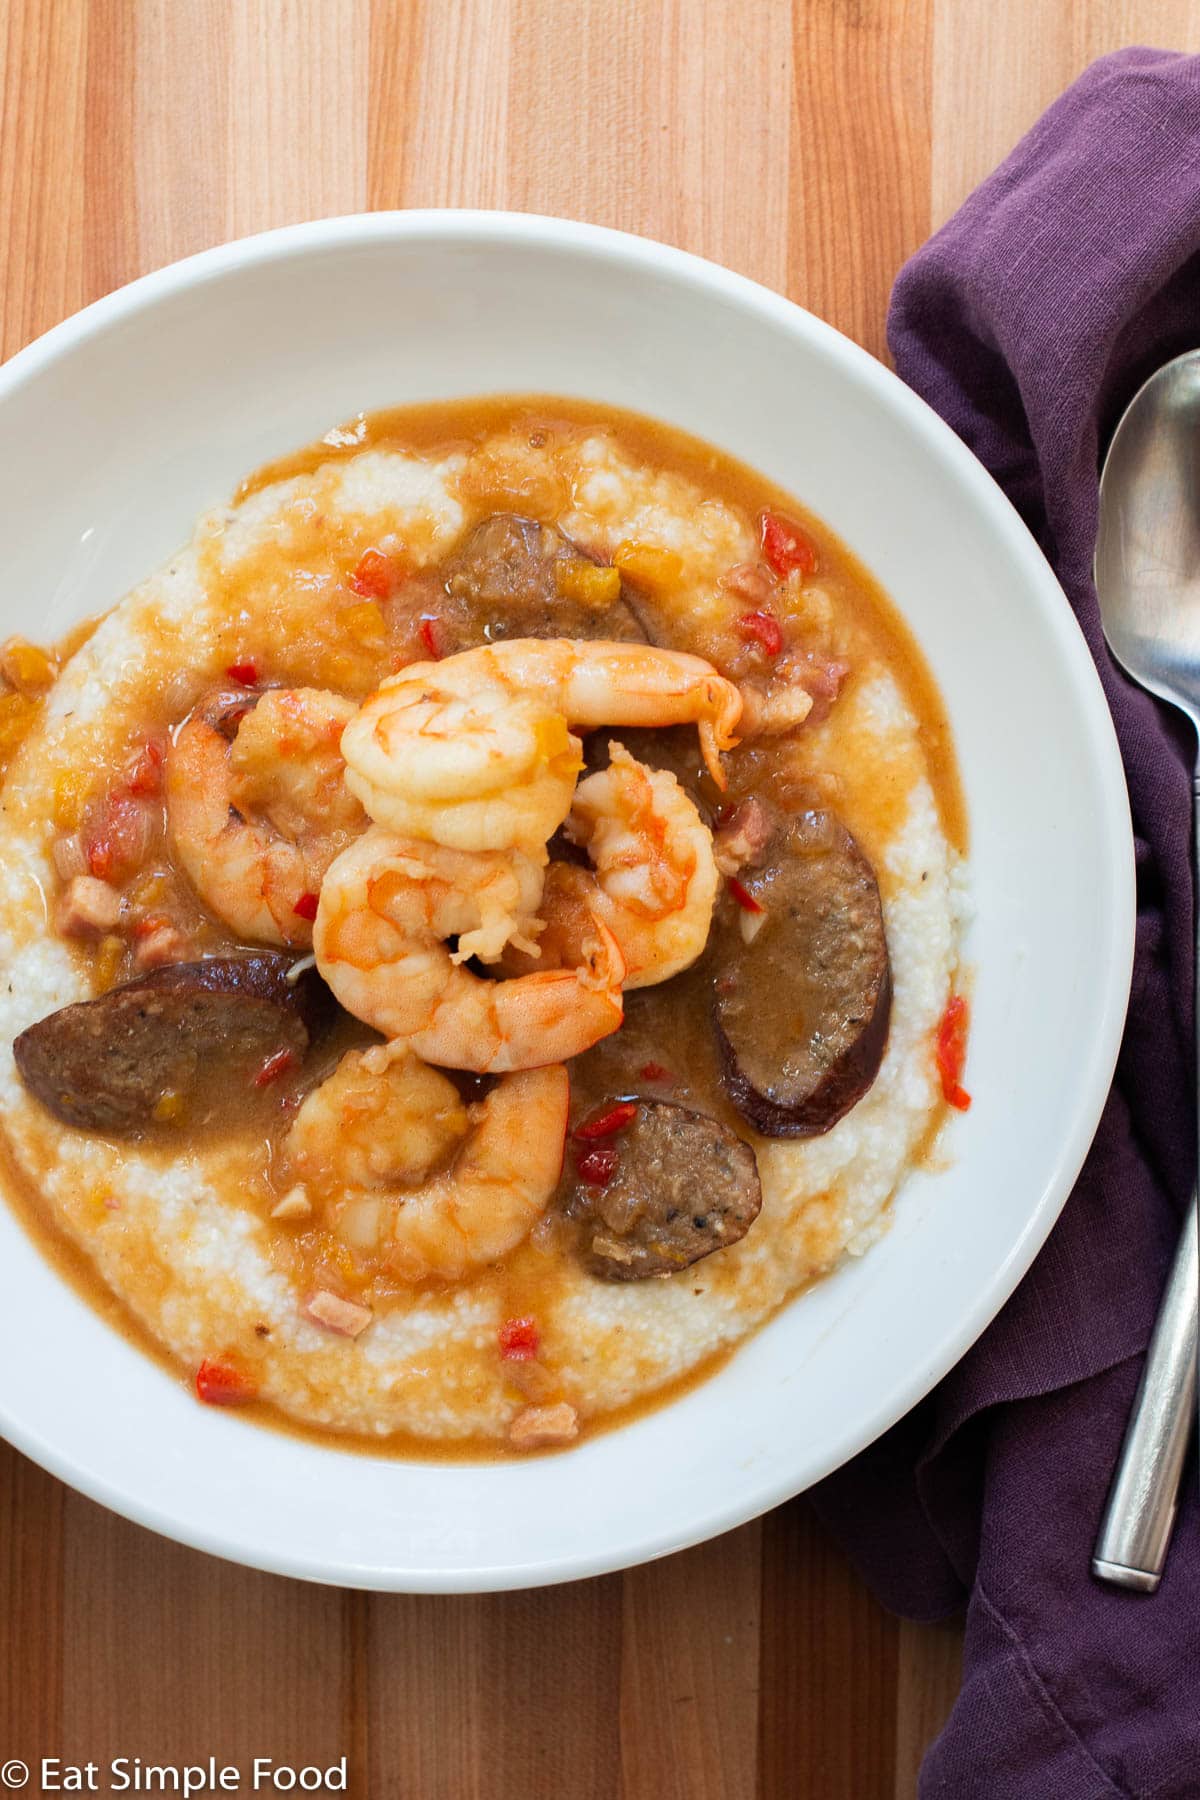 Shrimp and Andouille Sausage slices in a red brown gravy over white grits in a white bowl. Spoon and purple napkin on side.